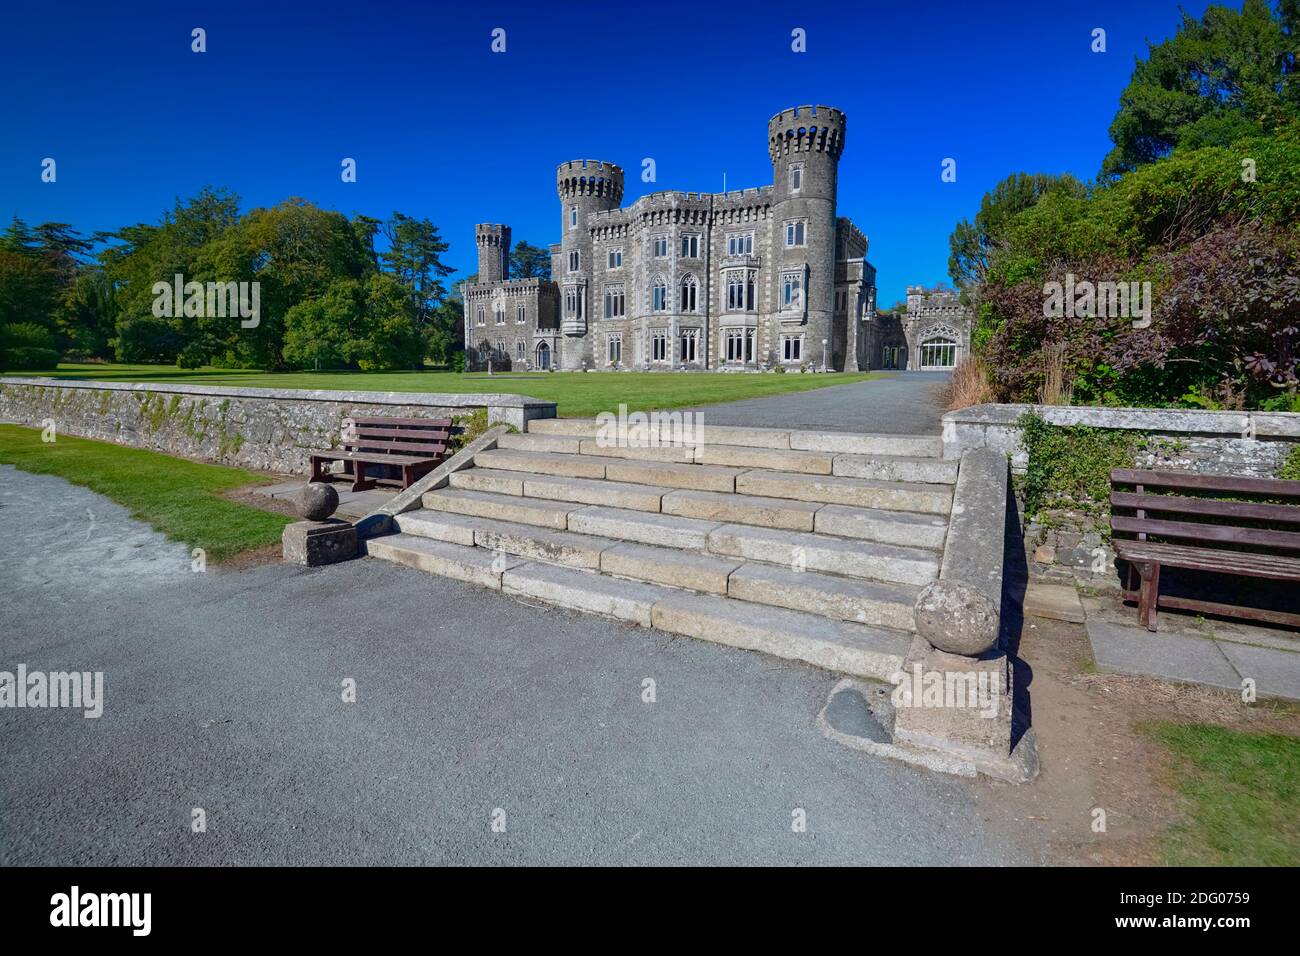 Republik Irland, County Wexford, Gothic Revival Johnstown Castle. Stockfoto